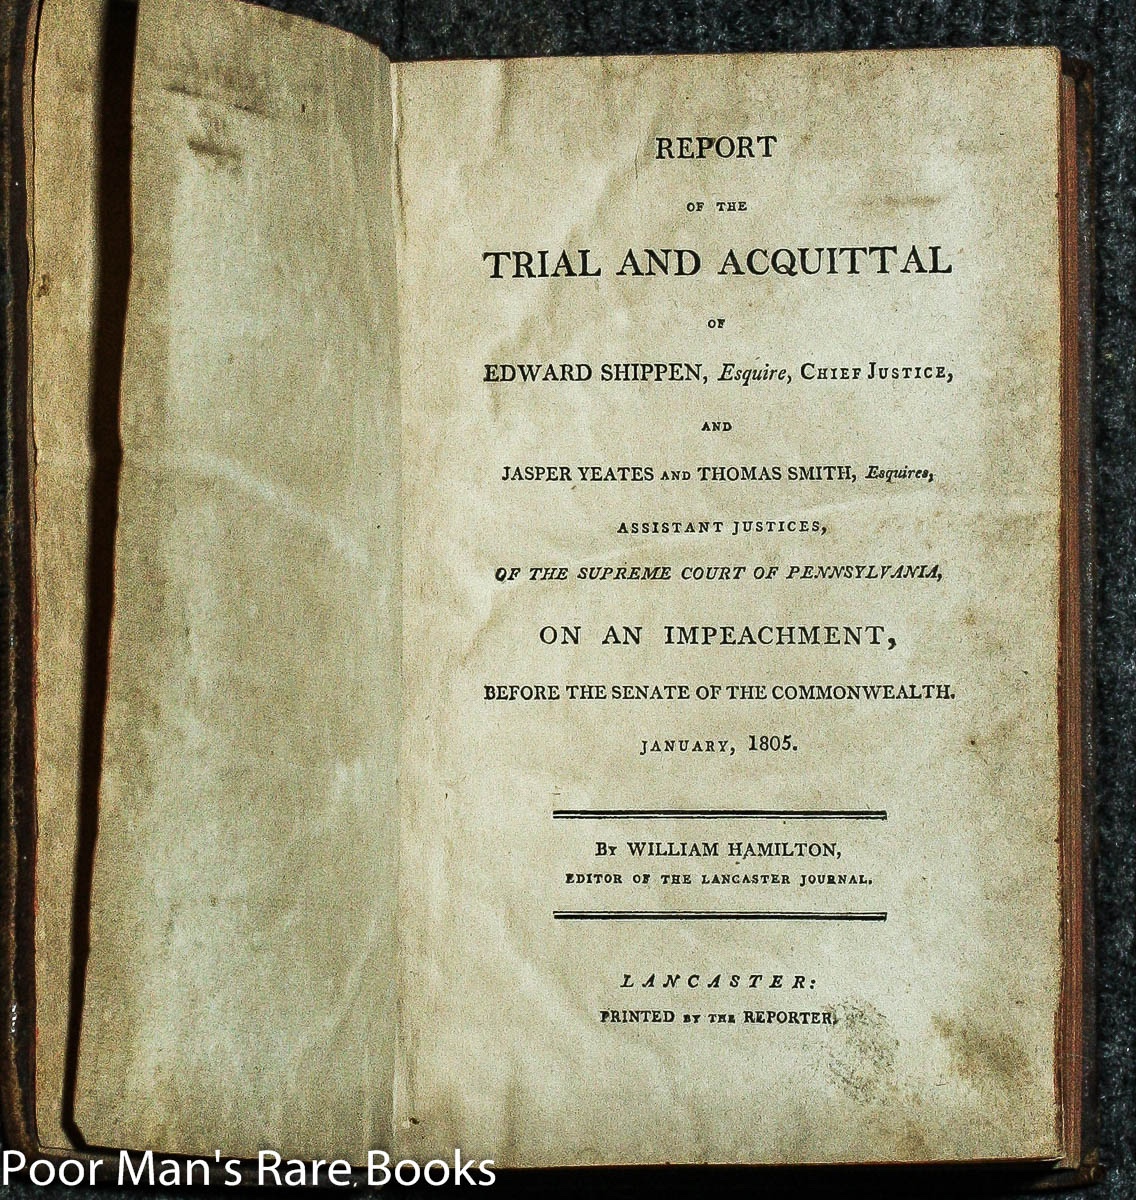 Image for Report Of The Trial And Acquittal Of Edward Shippen, Esquire, Chief Justice, And Jasper Yeates And Thomas Smith, Esquires, Assistant Justices, Of The Supreme Court Of Pennsylvania, On An Impeachment Before The Senate Of The Commonwealth, January, 1805